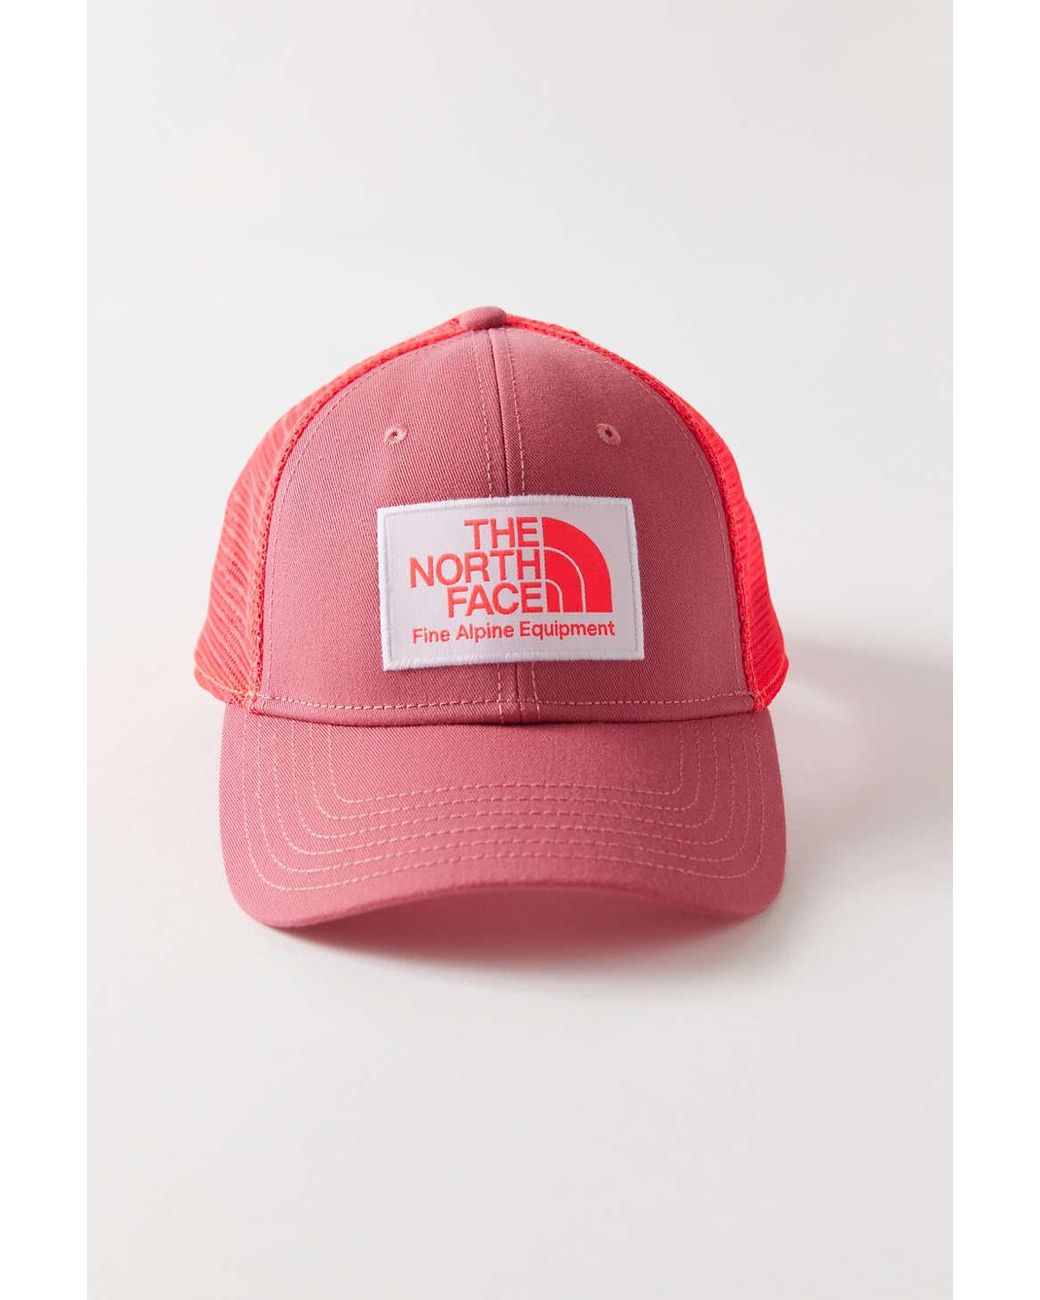 The North Face Synthetic Mudder Trucker Hat in Rose (Pink) | Lyst